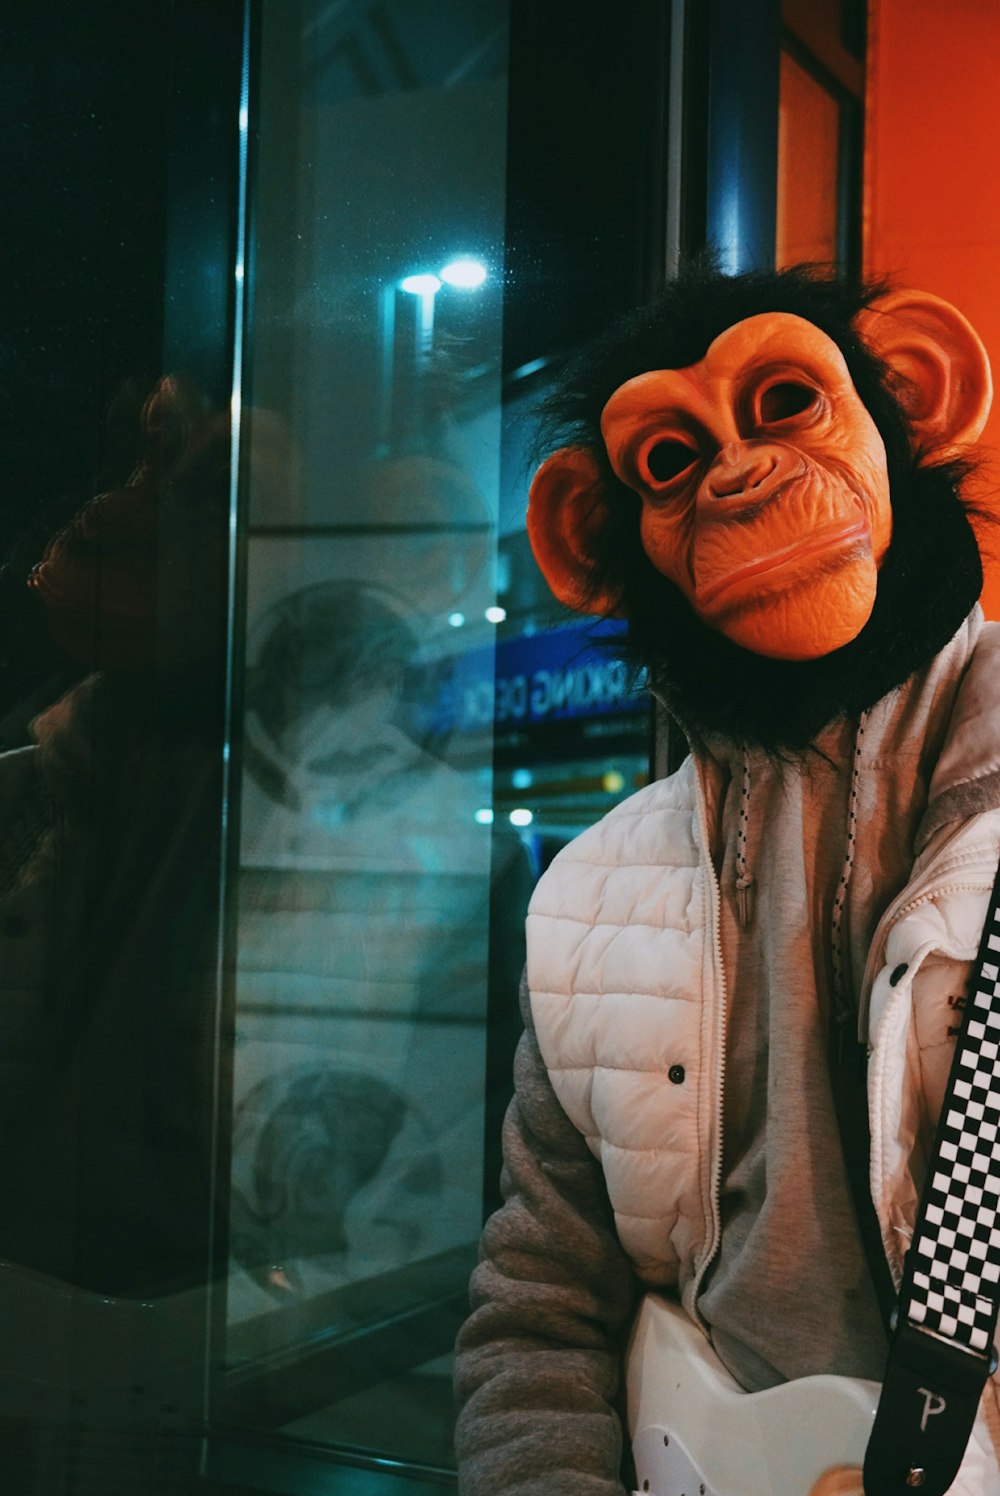 a monkey wearing a jacket and tie holding a guitar